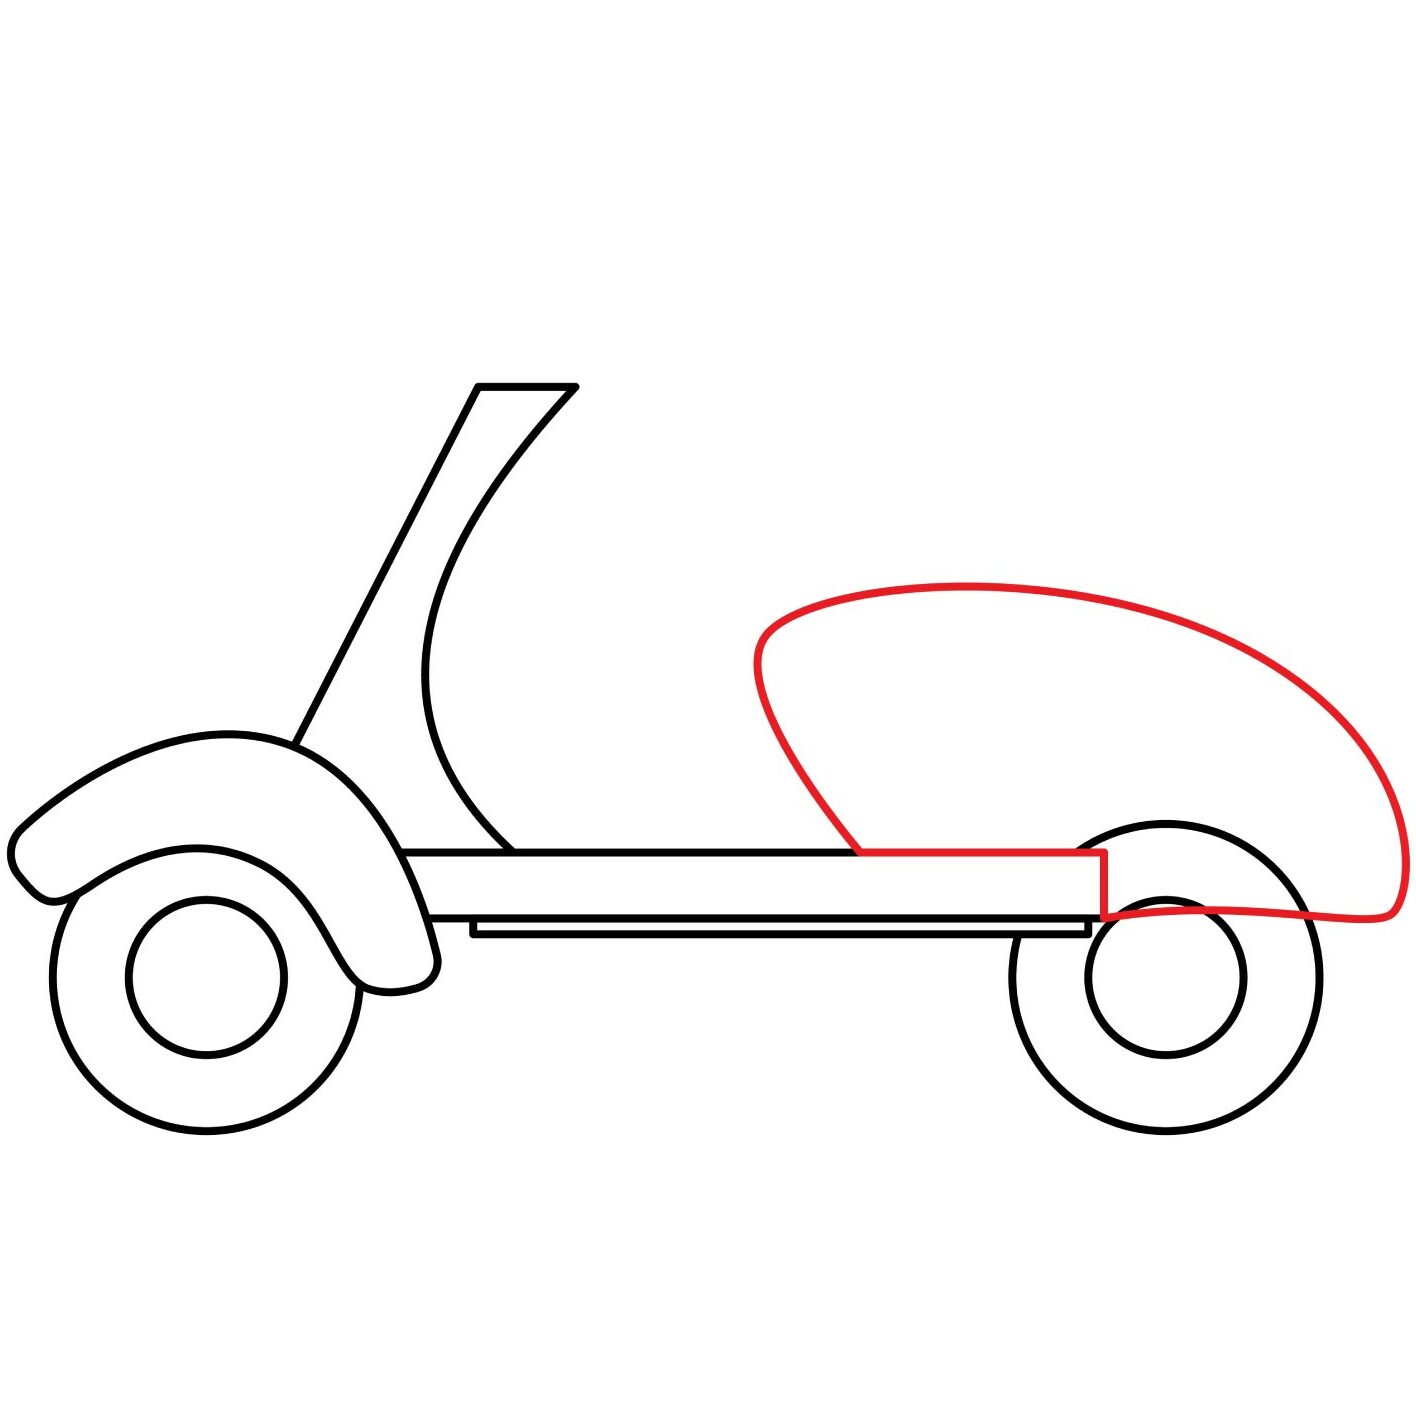 How to Draw a Vintage Scooter